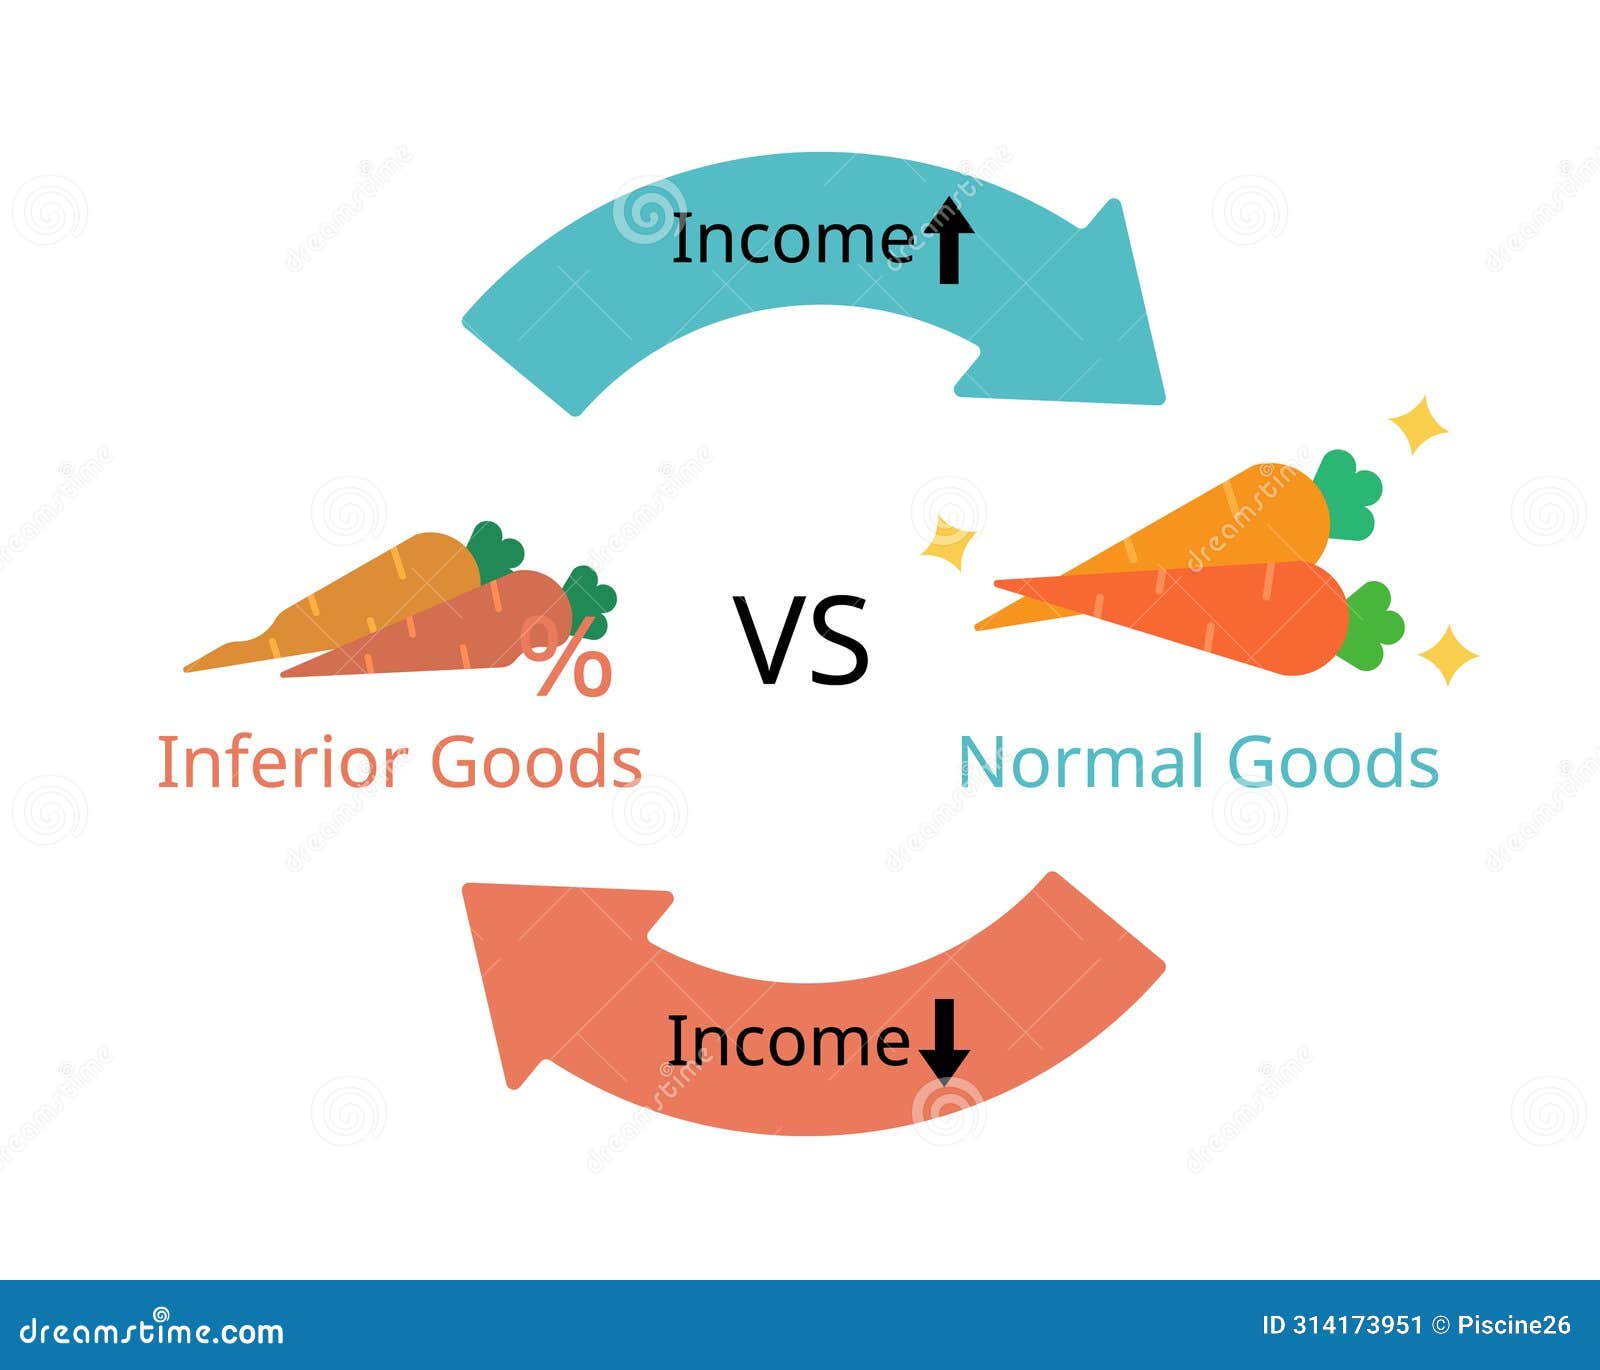 income elasticity of demand and types of goods for normal goods and inferior goods